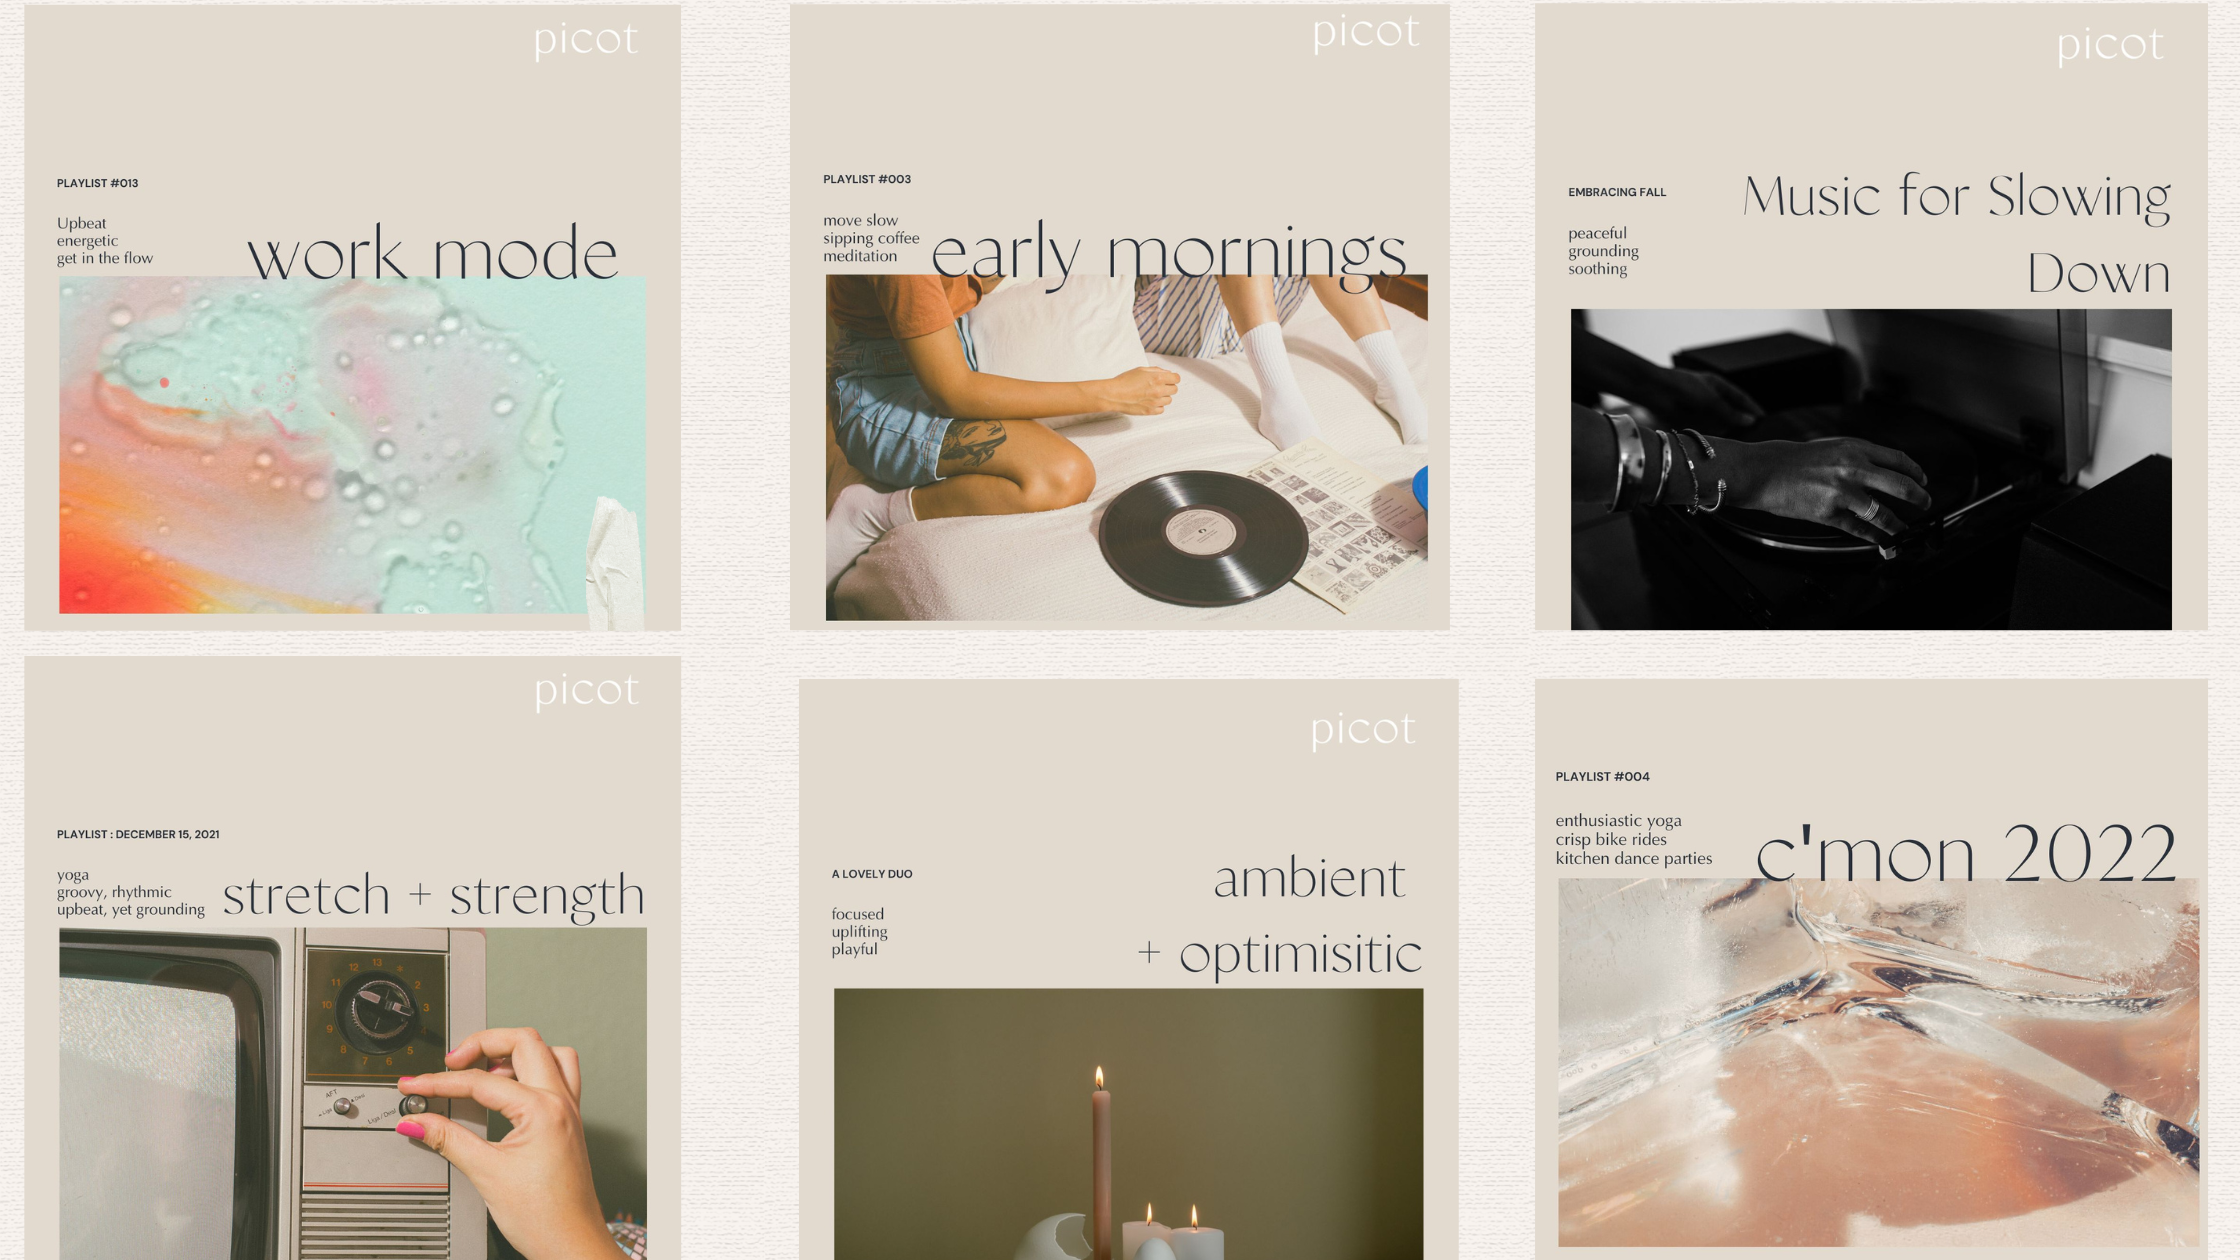 picot collective playlists